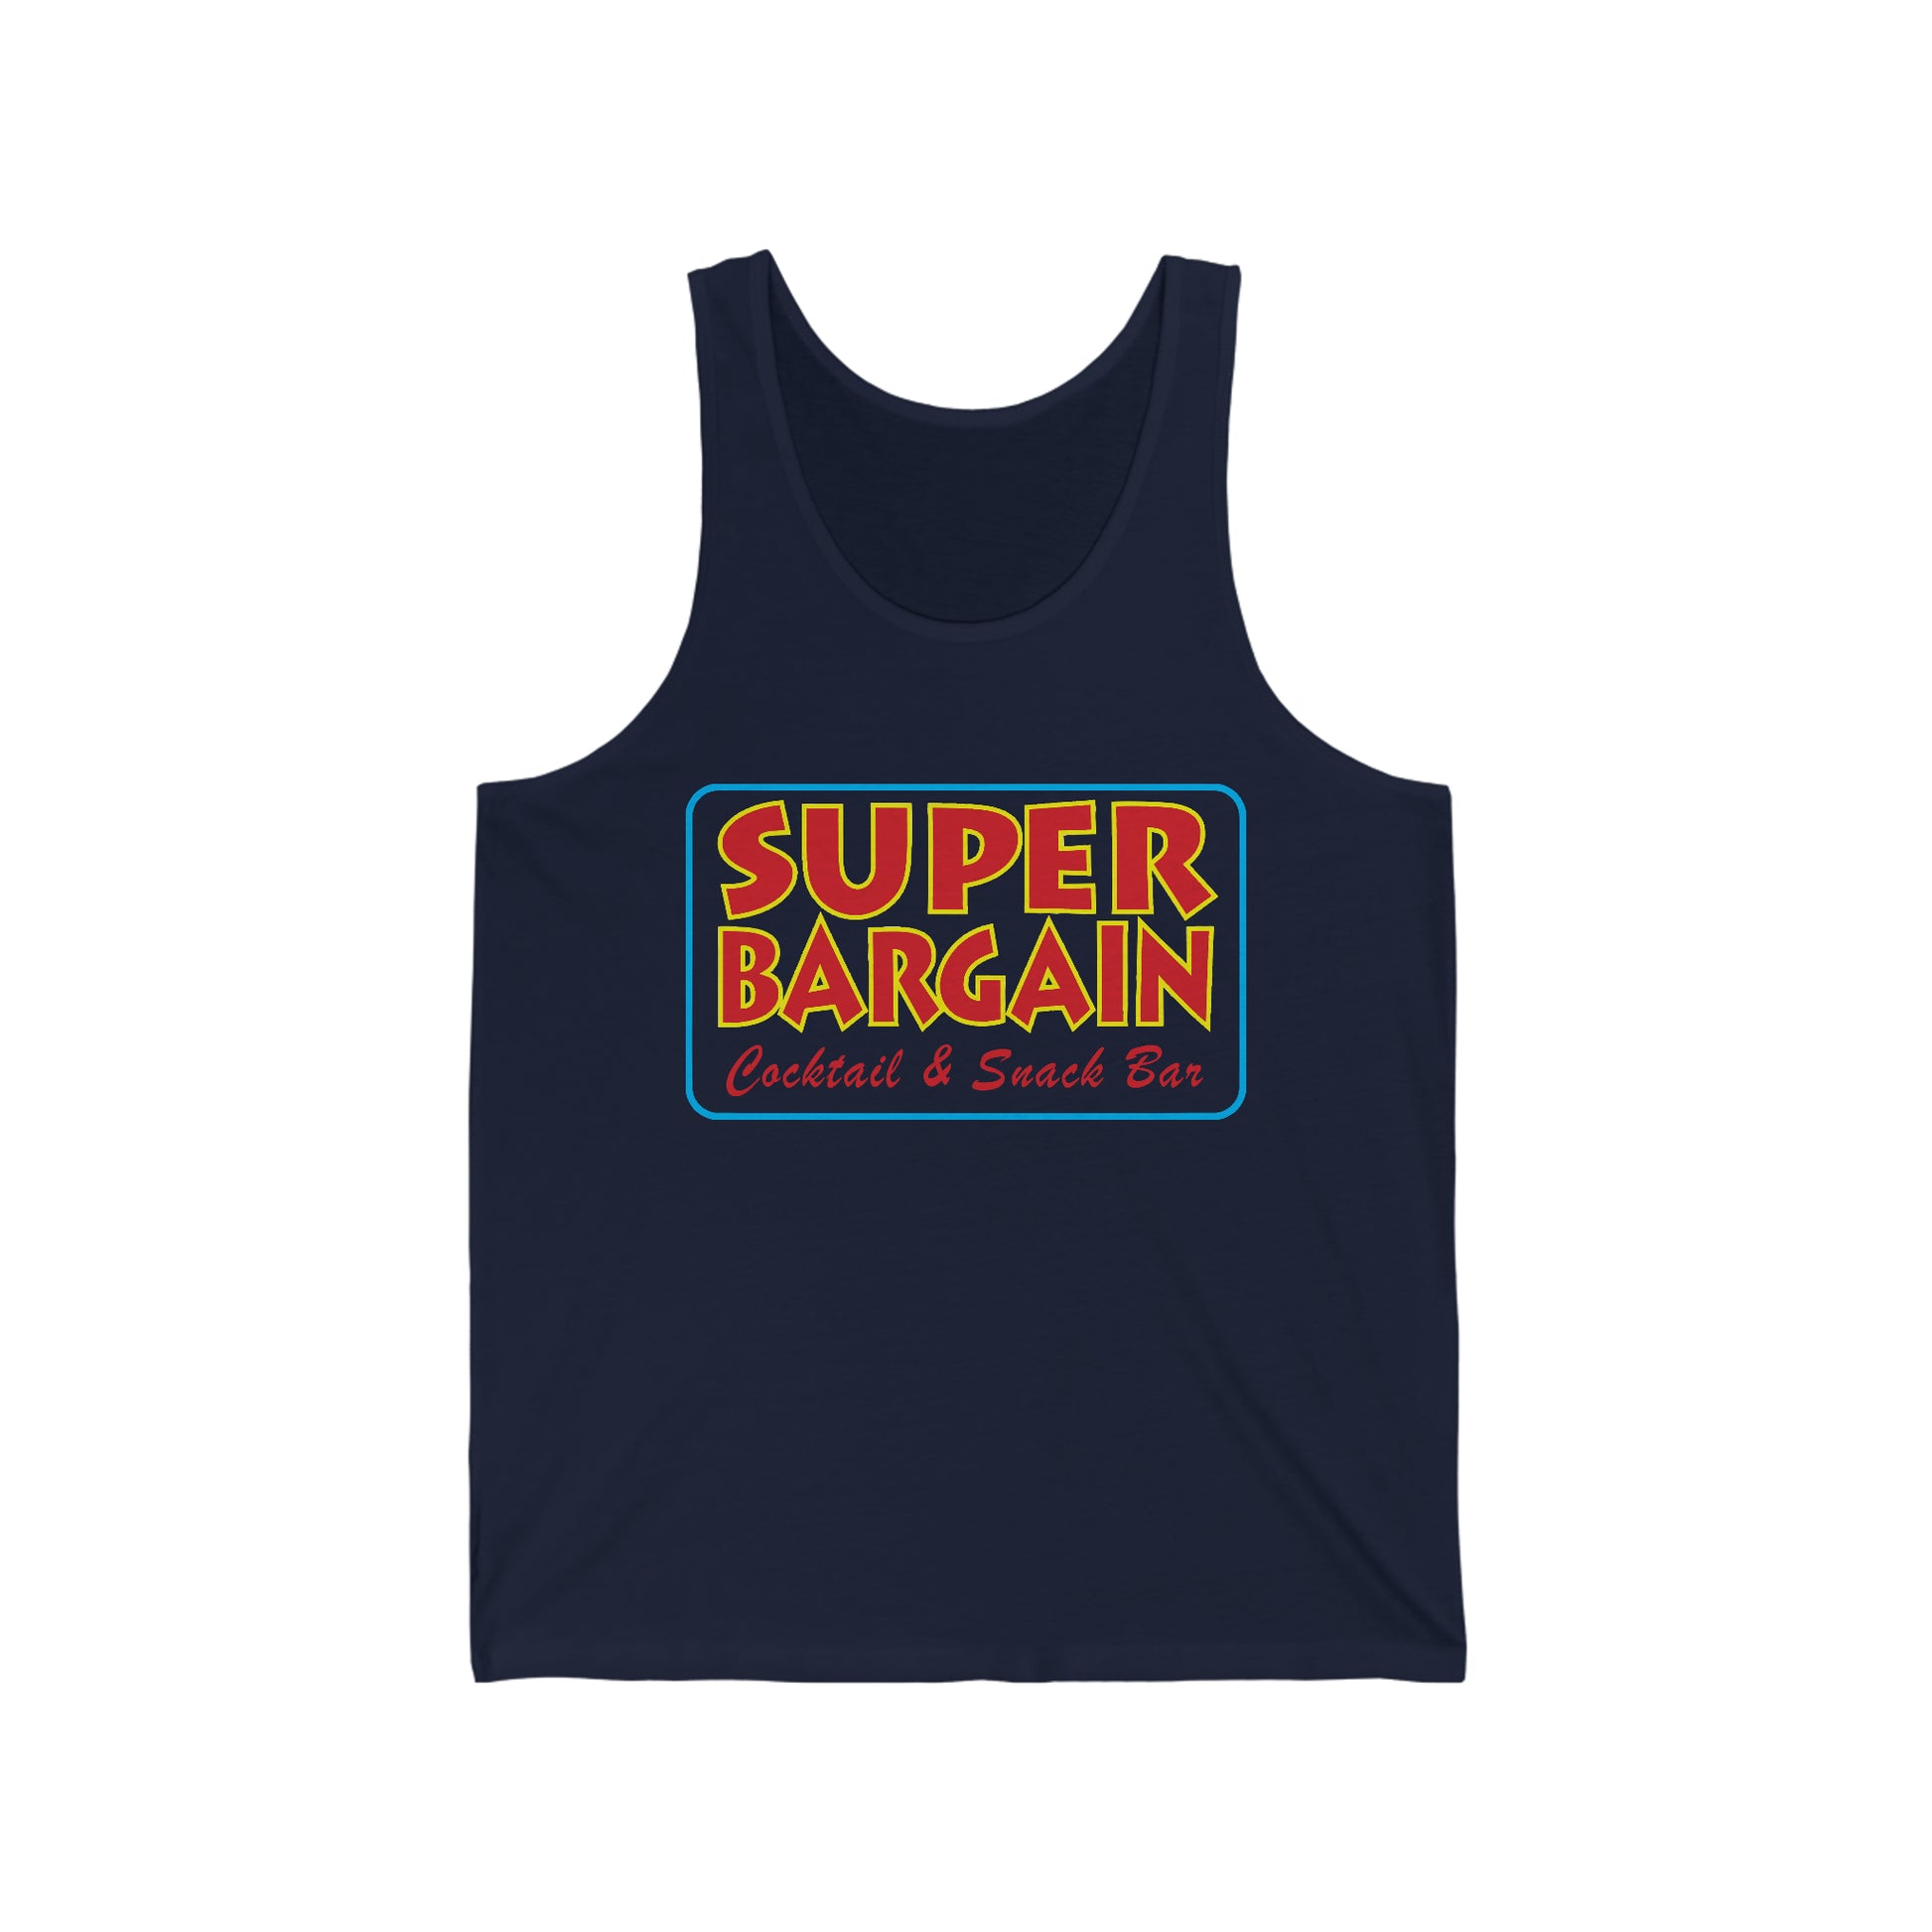 Navy blue Unisex Jersey Tank with a colorful "SUPER BARGAIN Cocktail & Snack Bar - Cabbagetown, Toronto" logo printed in the center, featuring red, yellow, and green colors by Printify.